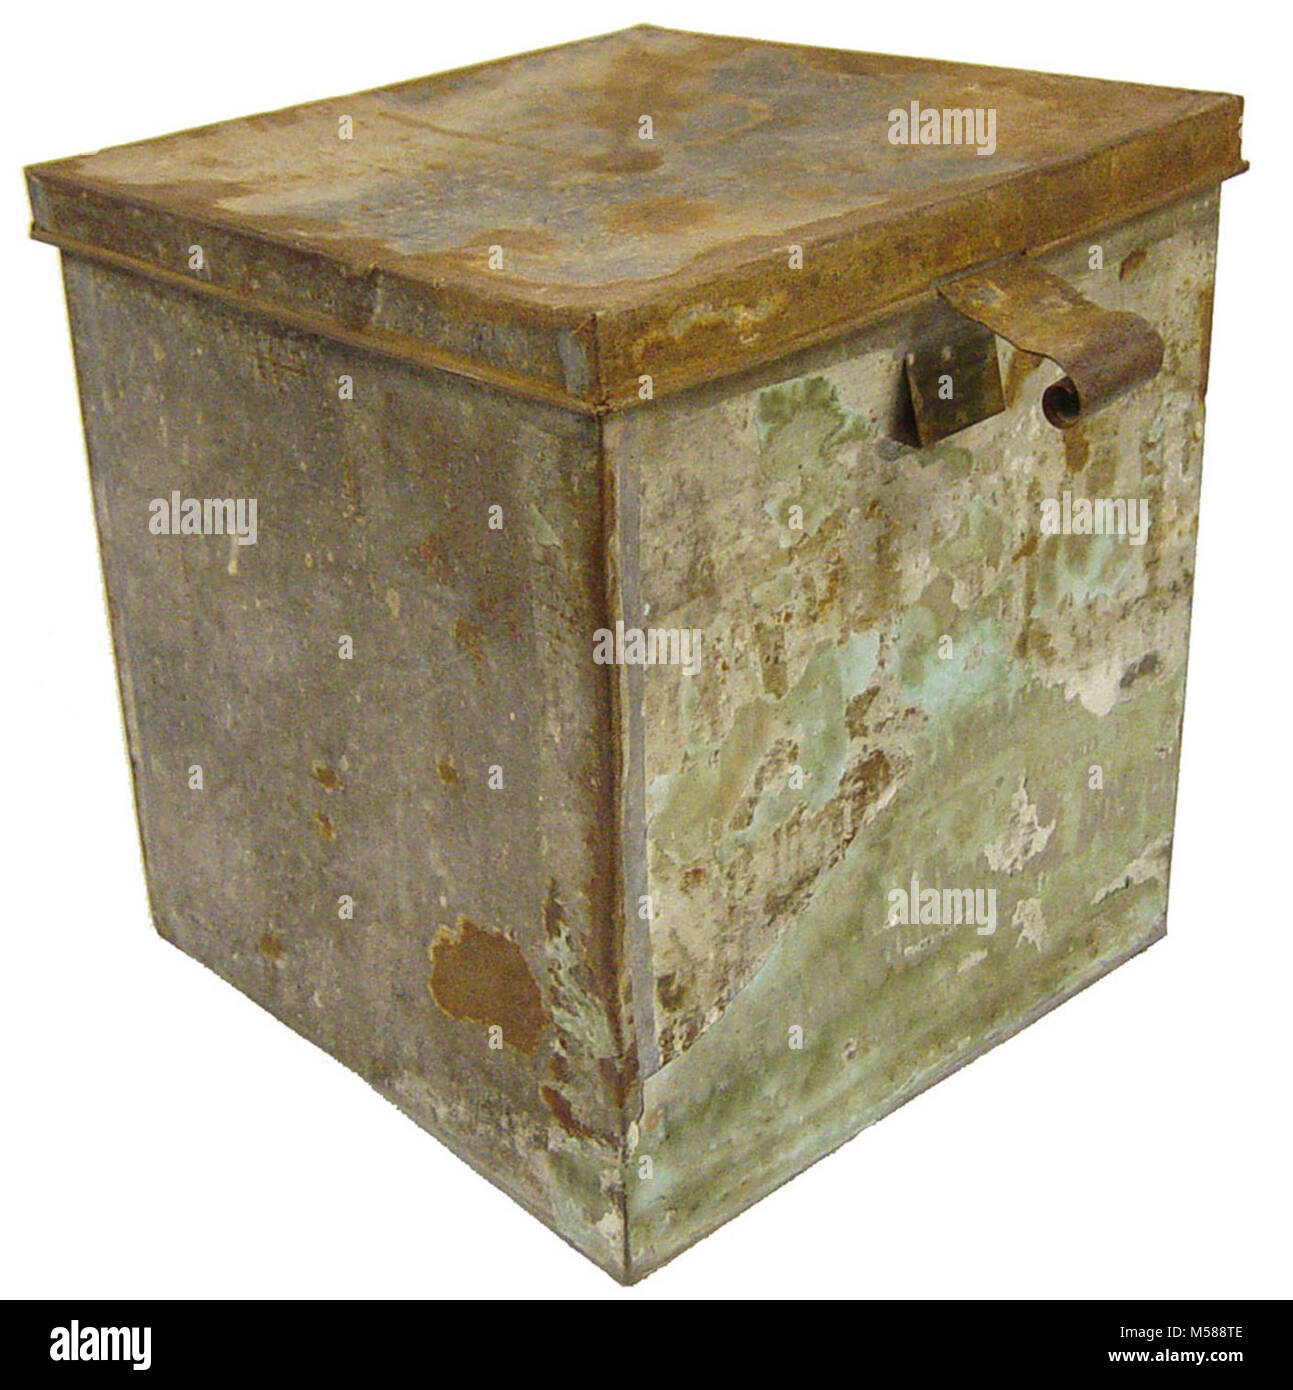 Grand Canyon National Park  Miner's Cache. OBLONG BOX WITH LID AT TOP SECURED TWO HINGES IN REAR.  FRONT OF LID HAS LATCH WHICH FITS UNDER CATCH AT FRONT OF BOX.  TRACES OF GREEN PAINT.  HAS SOME LEGIBLE PRINT 'BAKERS AND     / PREPARED AND PACKED BY/    BAUM, GOLDBER & BOWE ', WITH NUMBERS.  ILLEGIBLE ADDRESS BELOW.  DENTED AND RUSTED.  THIS ITEM WAS PART OF A 1893 MINER'S CACHE, STORED IN A LARGE SQUARE TIN AND LOCATED IN THE SUPAI AREA. SOME OF THE ITEMS FROM THIS CACHE ARE ON EXHIBIT AT THE GRAND CANYON VISITOR CENTER. (SOUTH RIM)  THE CACHE INCLUDED VARIOUS PROVISIONS,TOILETRIES AND SUNDR Stock Photo